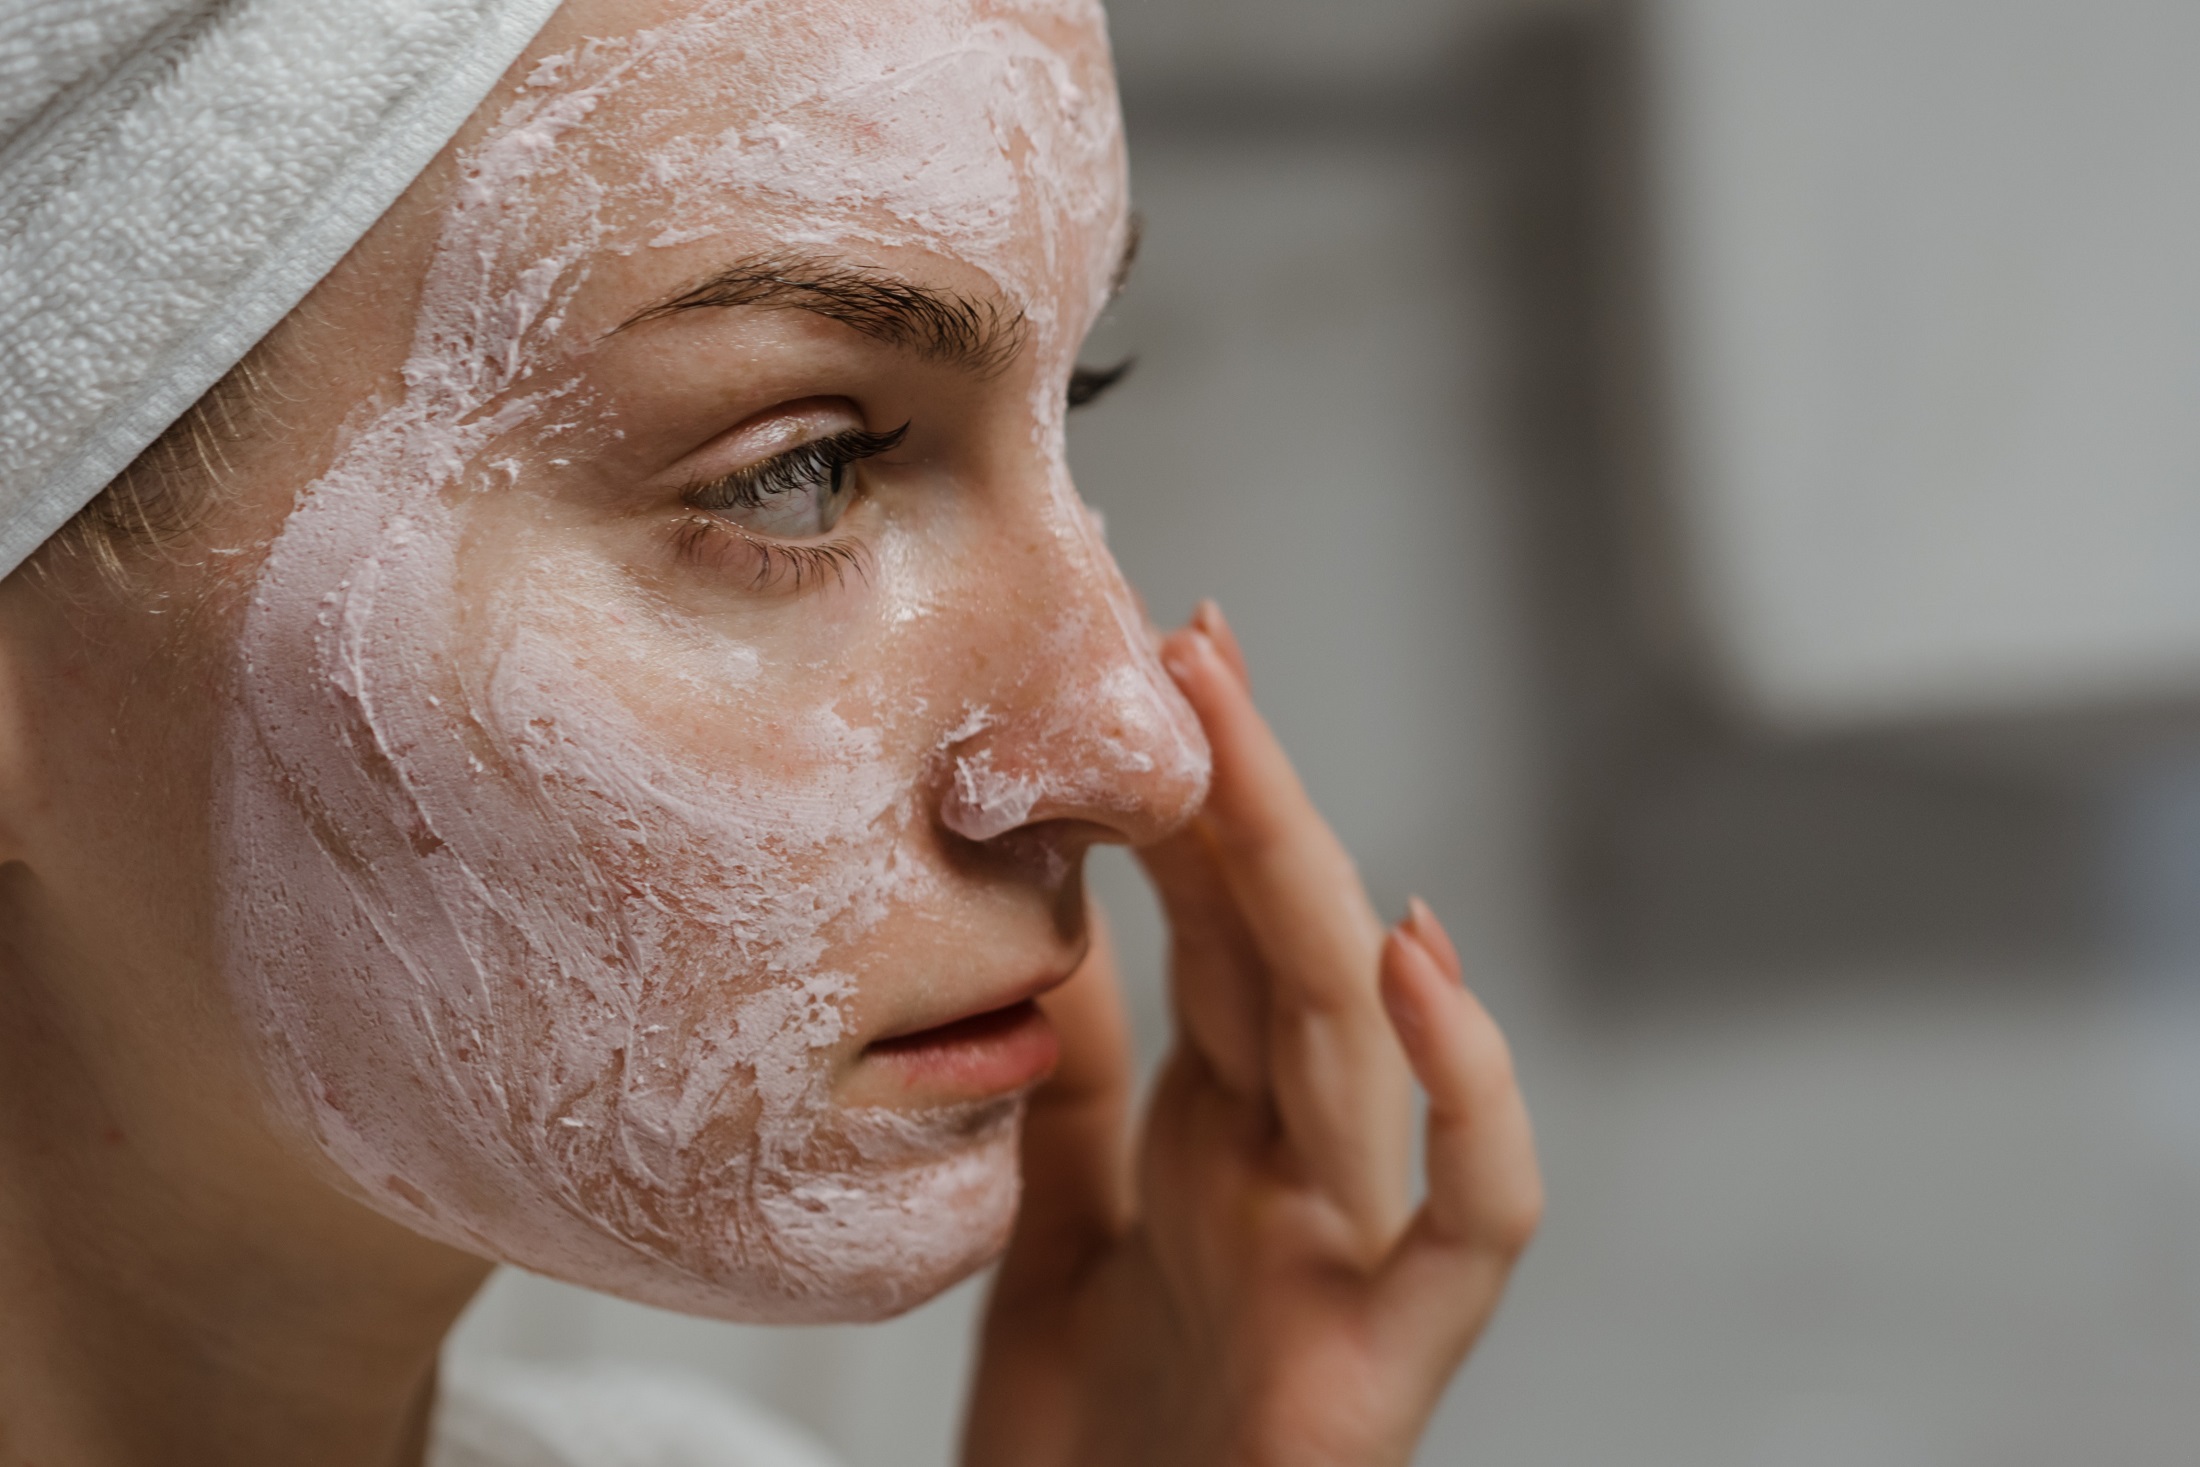 Skin care before 30 – what to use?